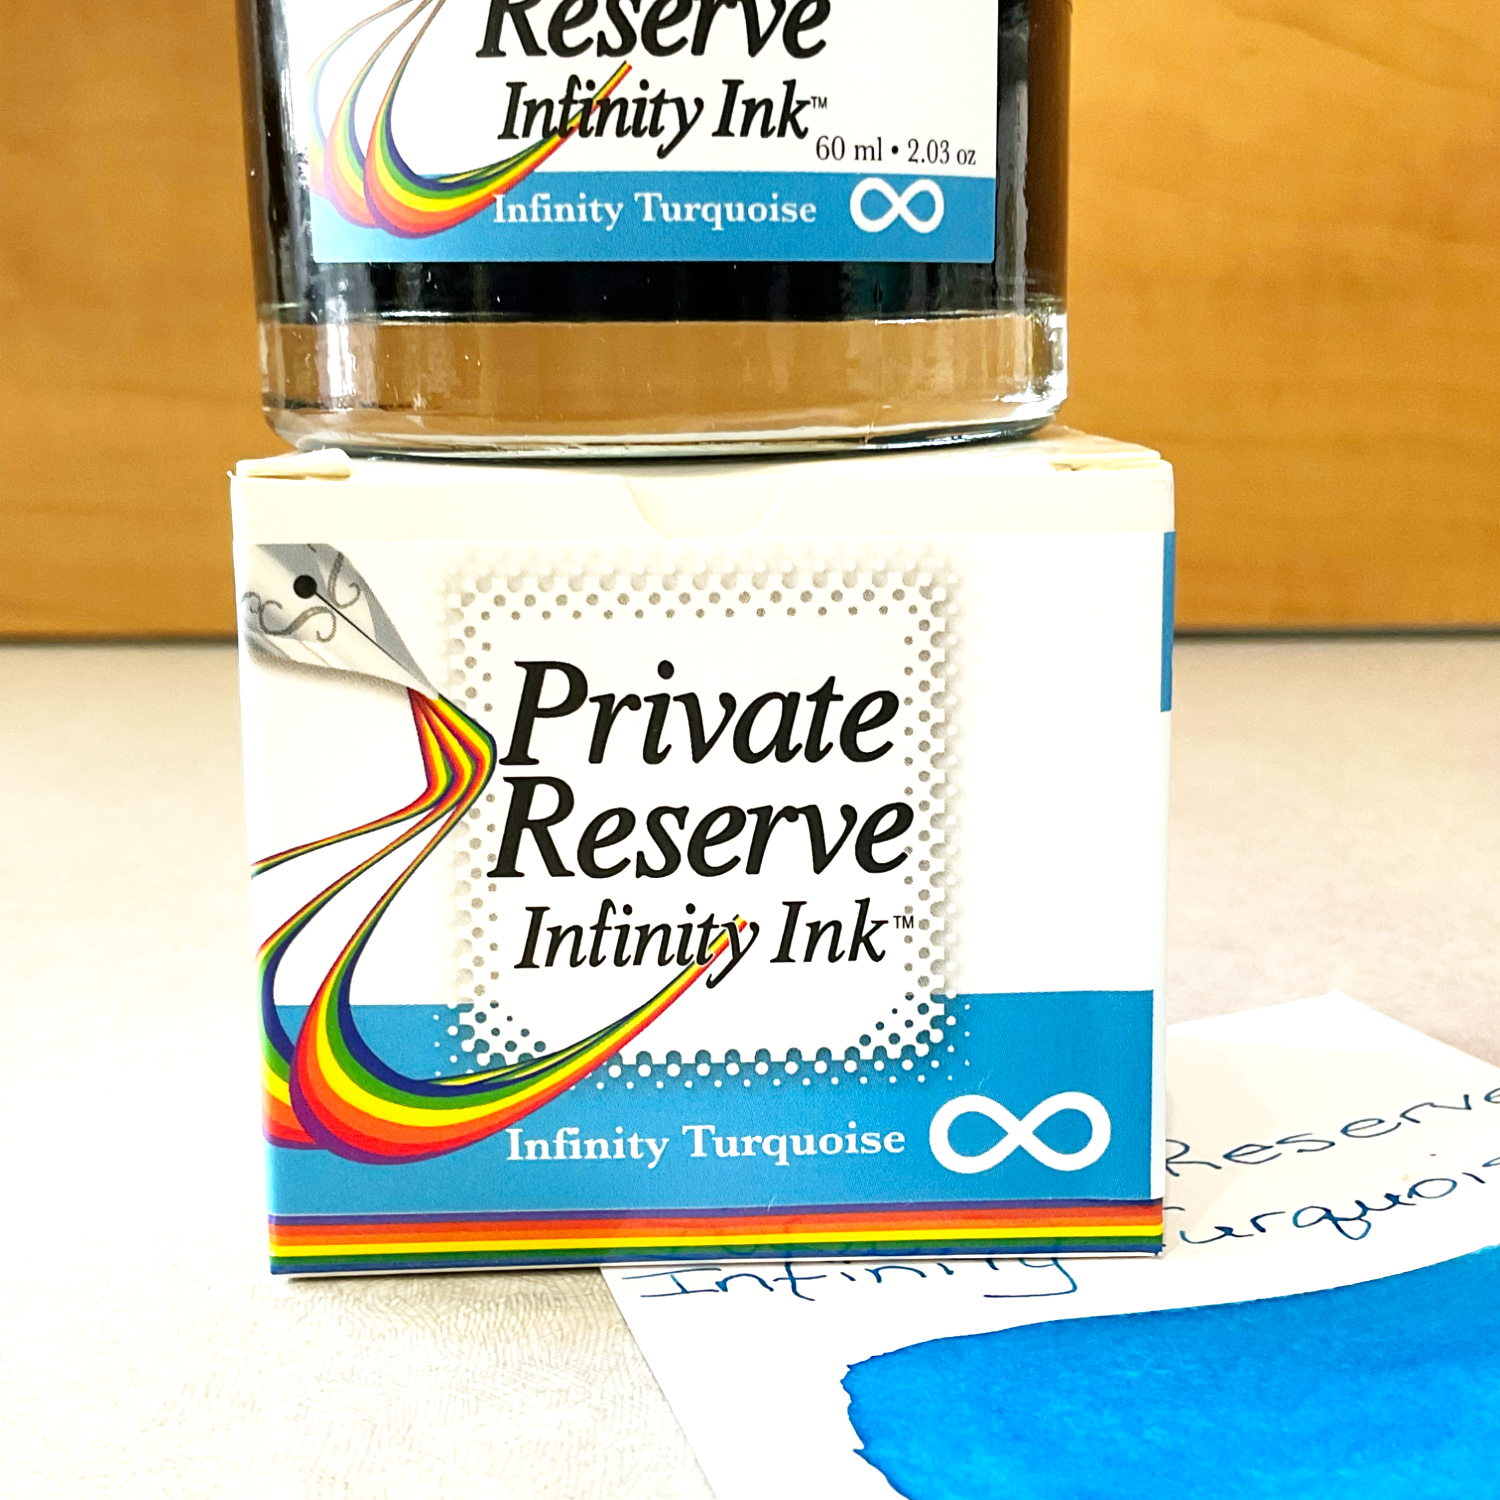 Private Reserve Infinity Ink